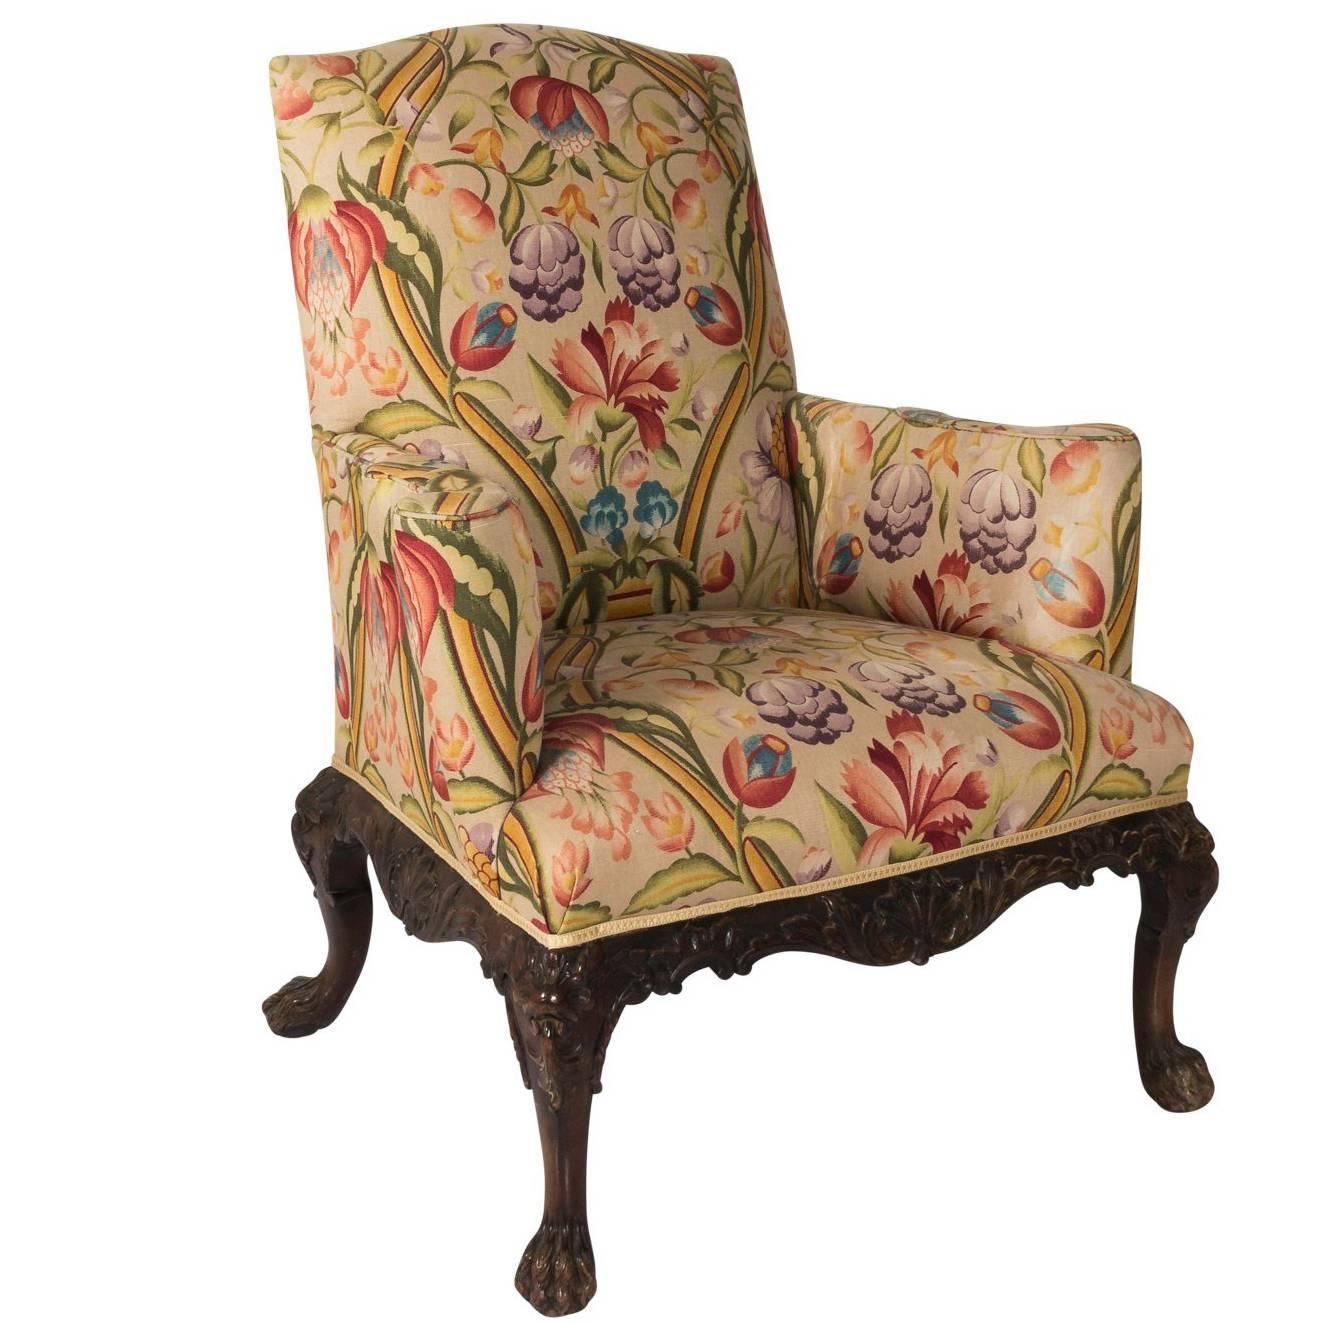 Late 19th Century Chippendale Style Arm Chair